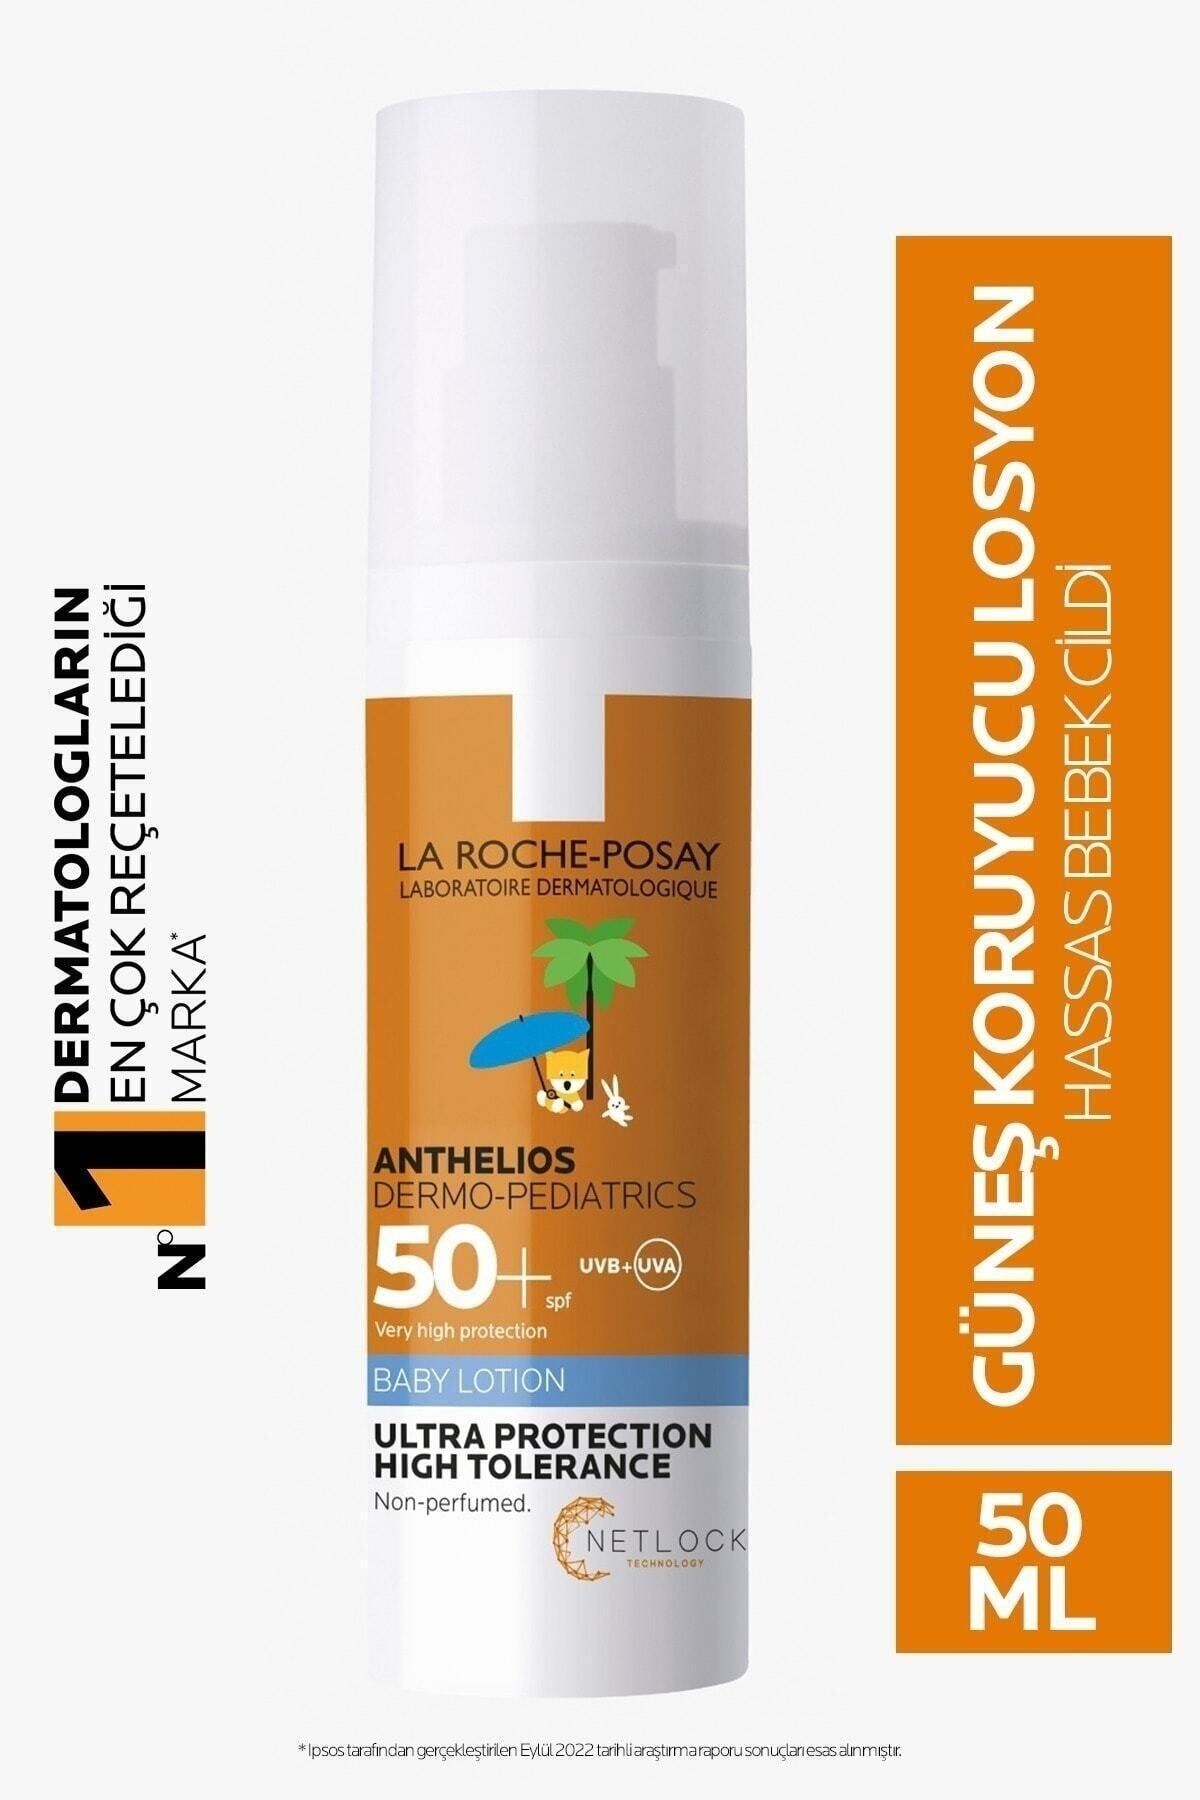 La Roche Posay Sun Protection Lotion Suitable For Baby Skin Against Uva, Uvb Rays 50ml..LRPosay.